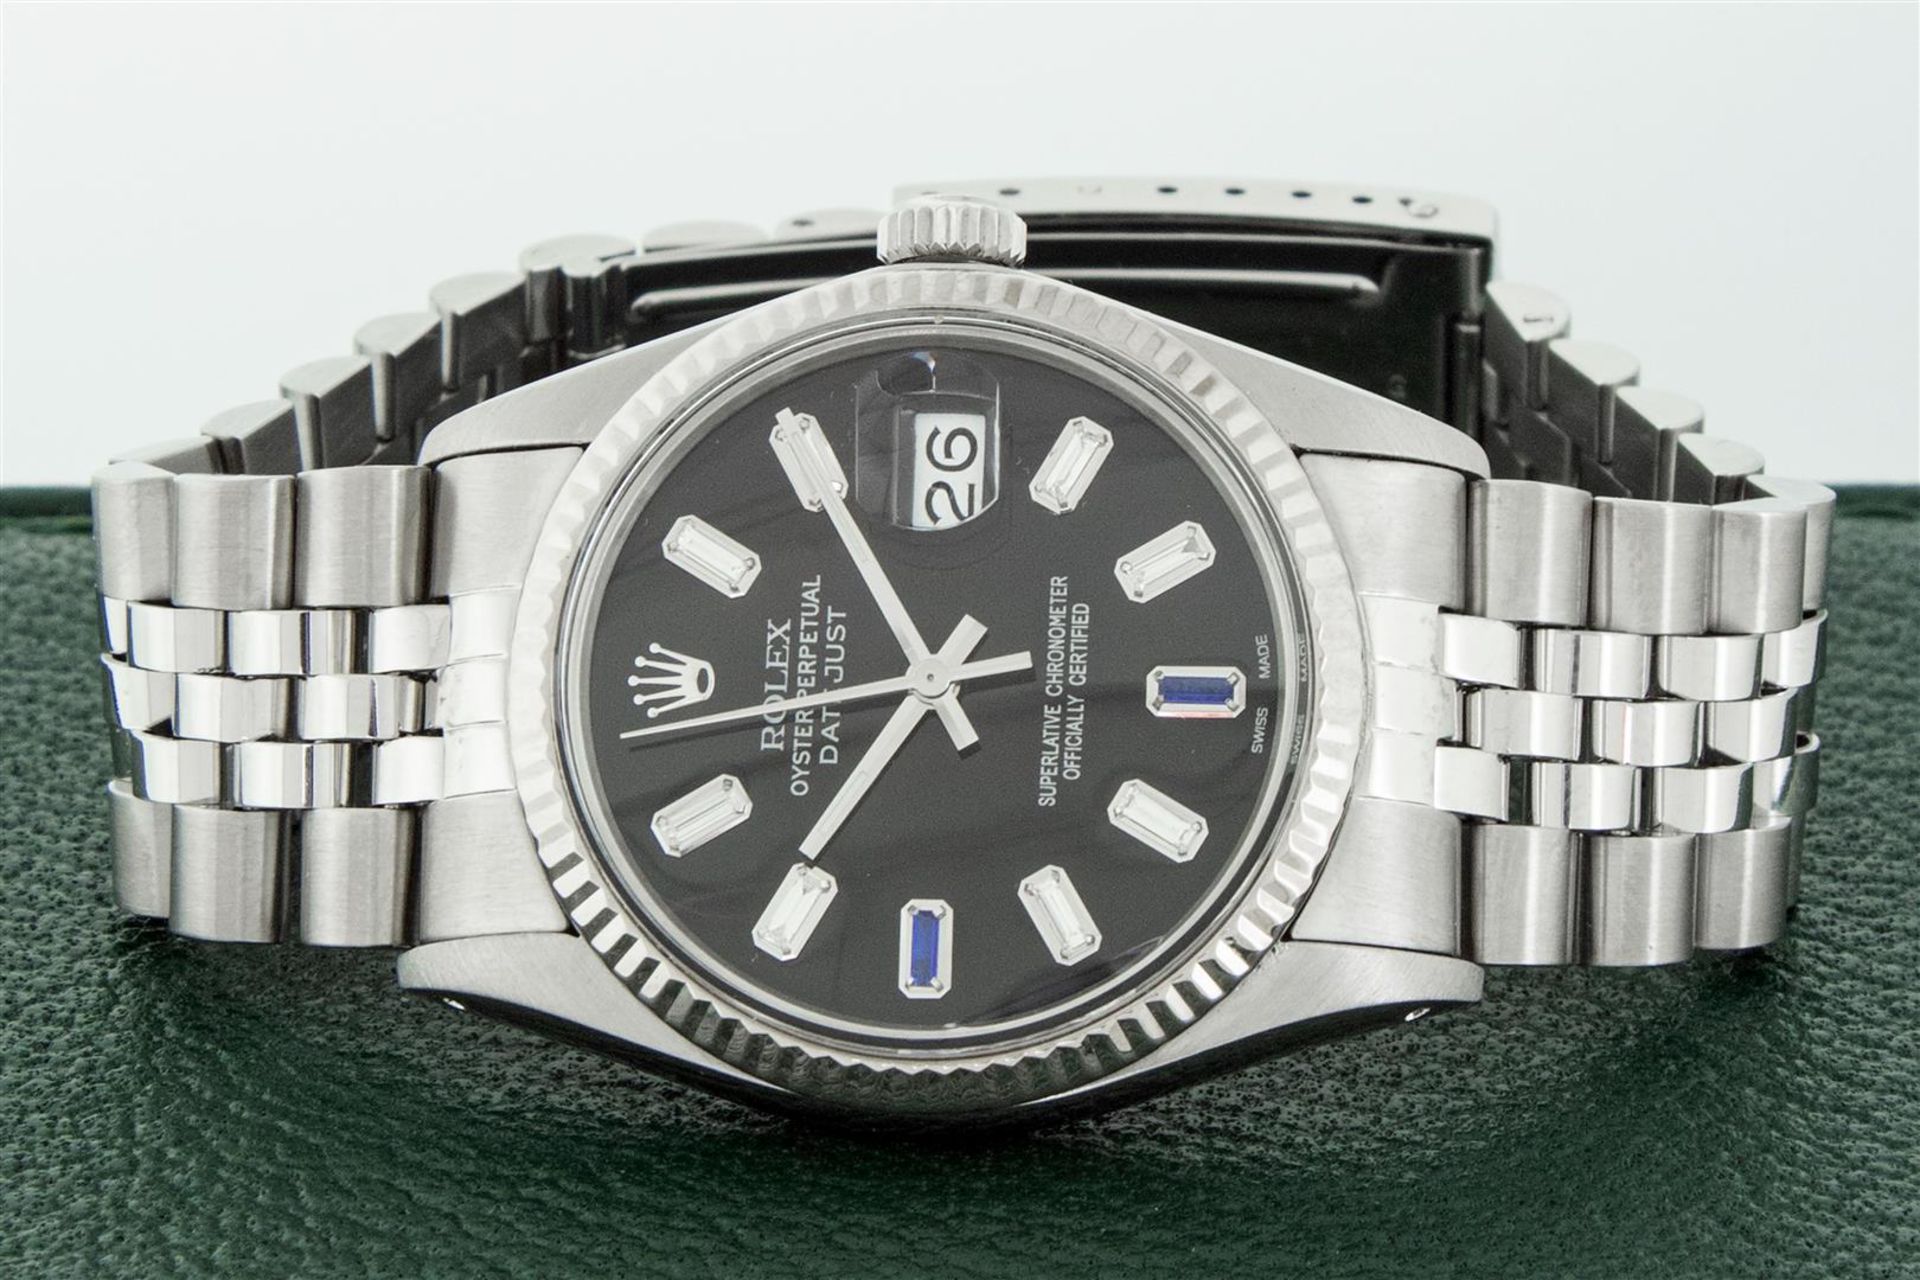 Rolex Mens Stainless Steel 36mm Black Diamond Dial Datejust Wristwatch - Image 6 of 14